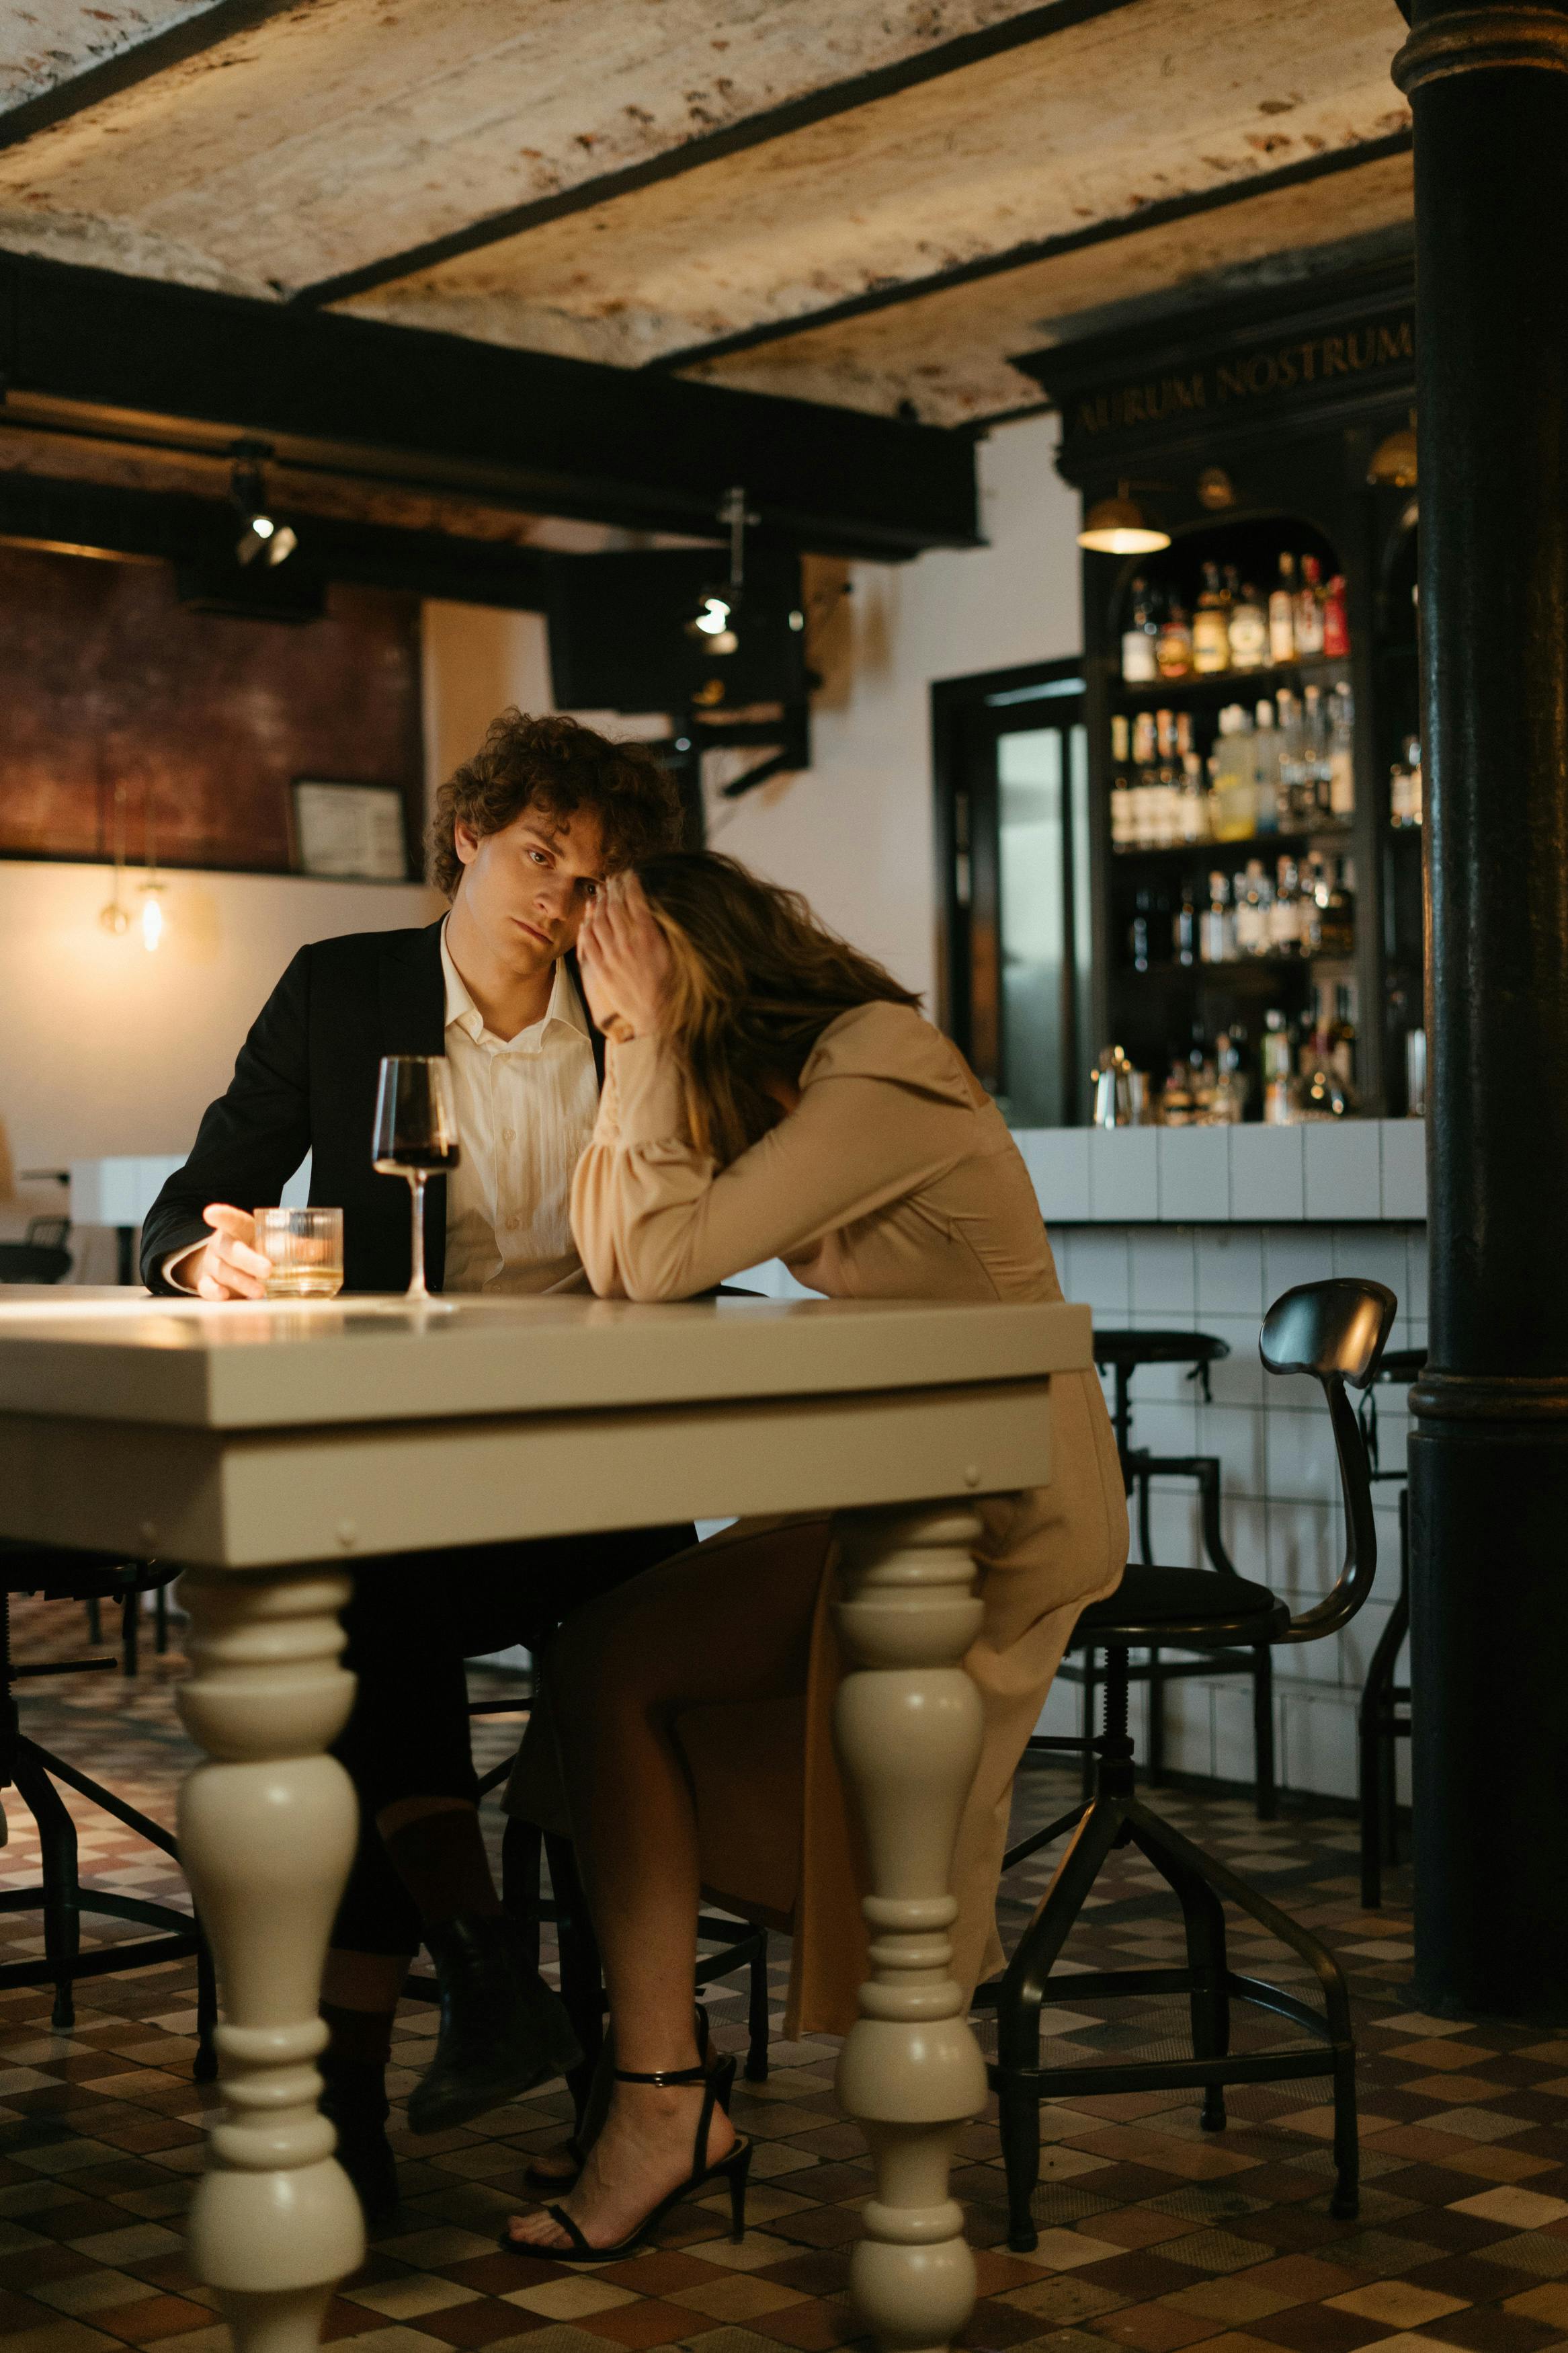 A distressed woman having an uncomfortable conversation with her man at a restaurant | Source: Pexels